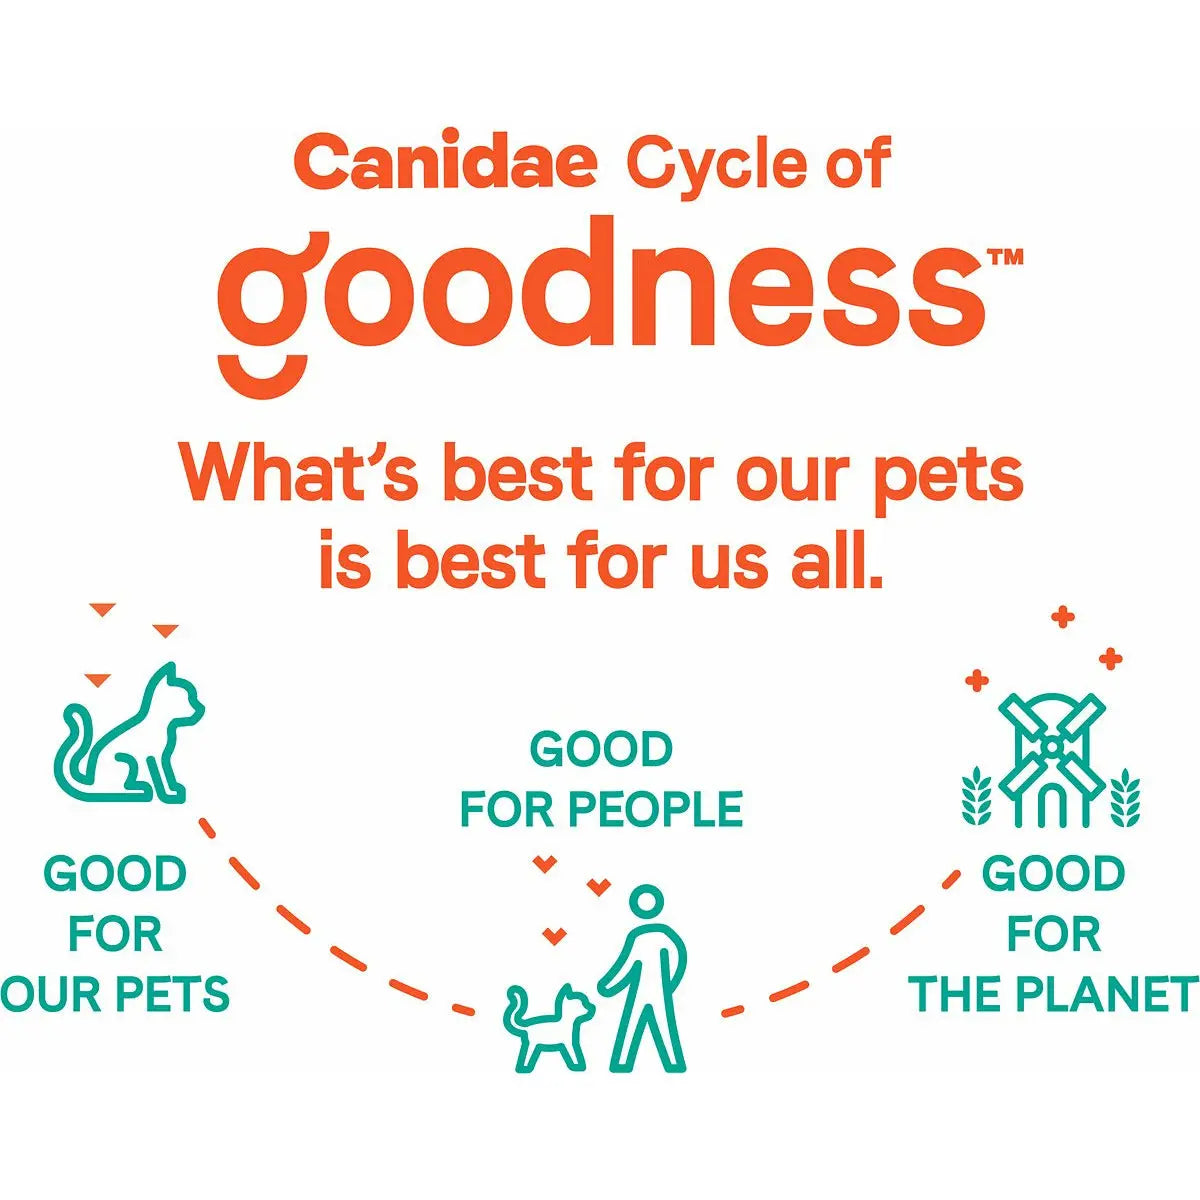 CANIDAE Goodness for Digestion Formula with Real Chicken Dry Cat Food Canidae CPD